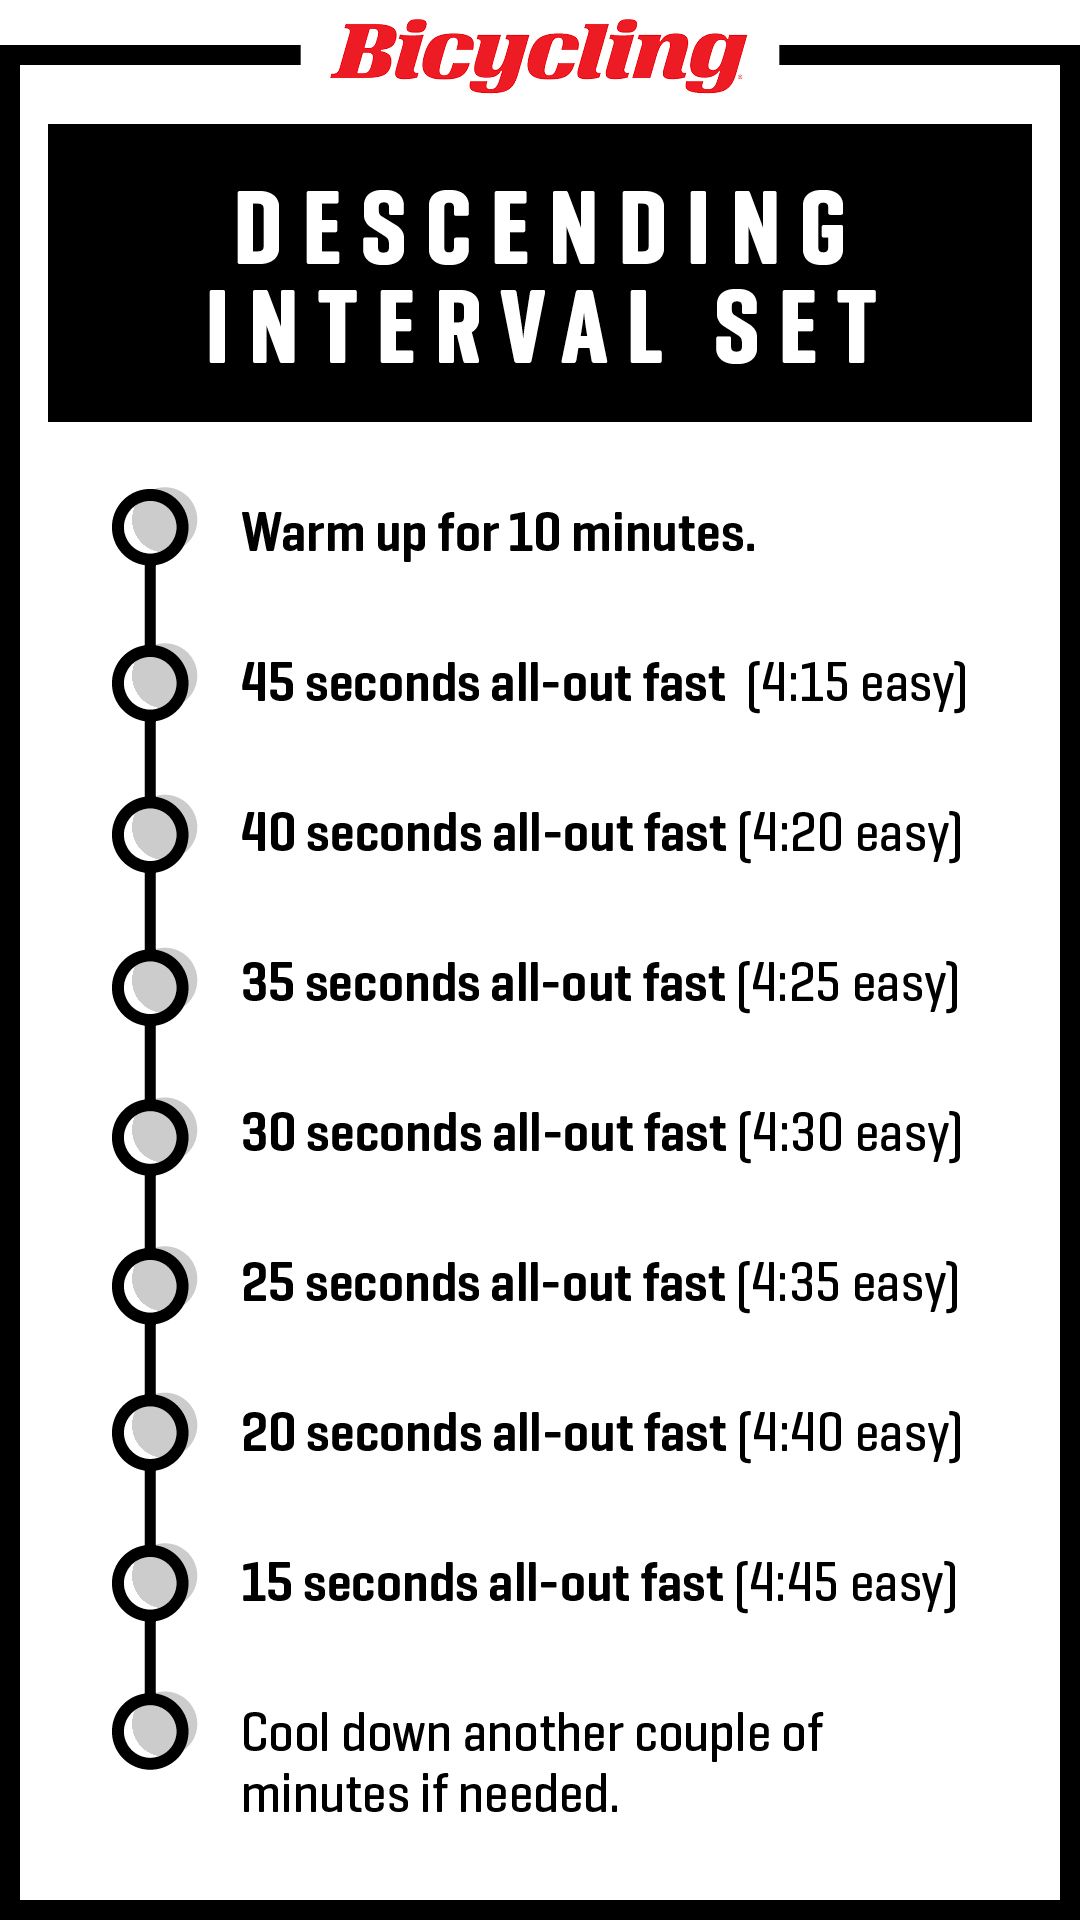 hiit bicycle workout